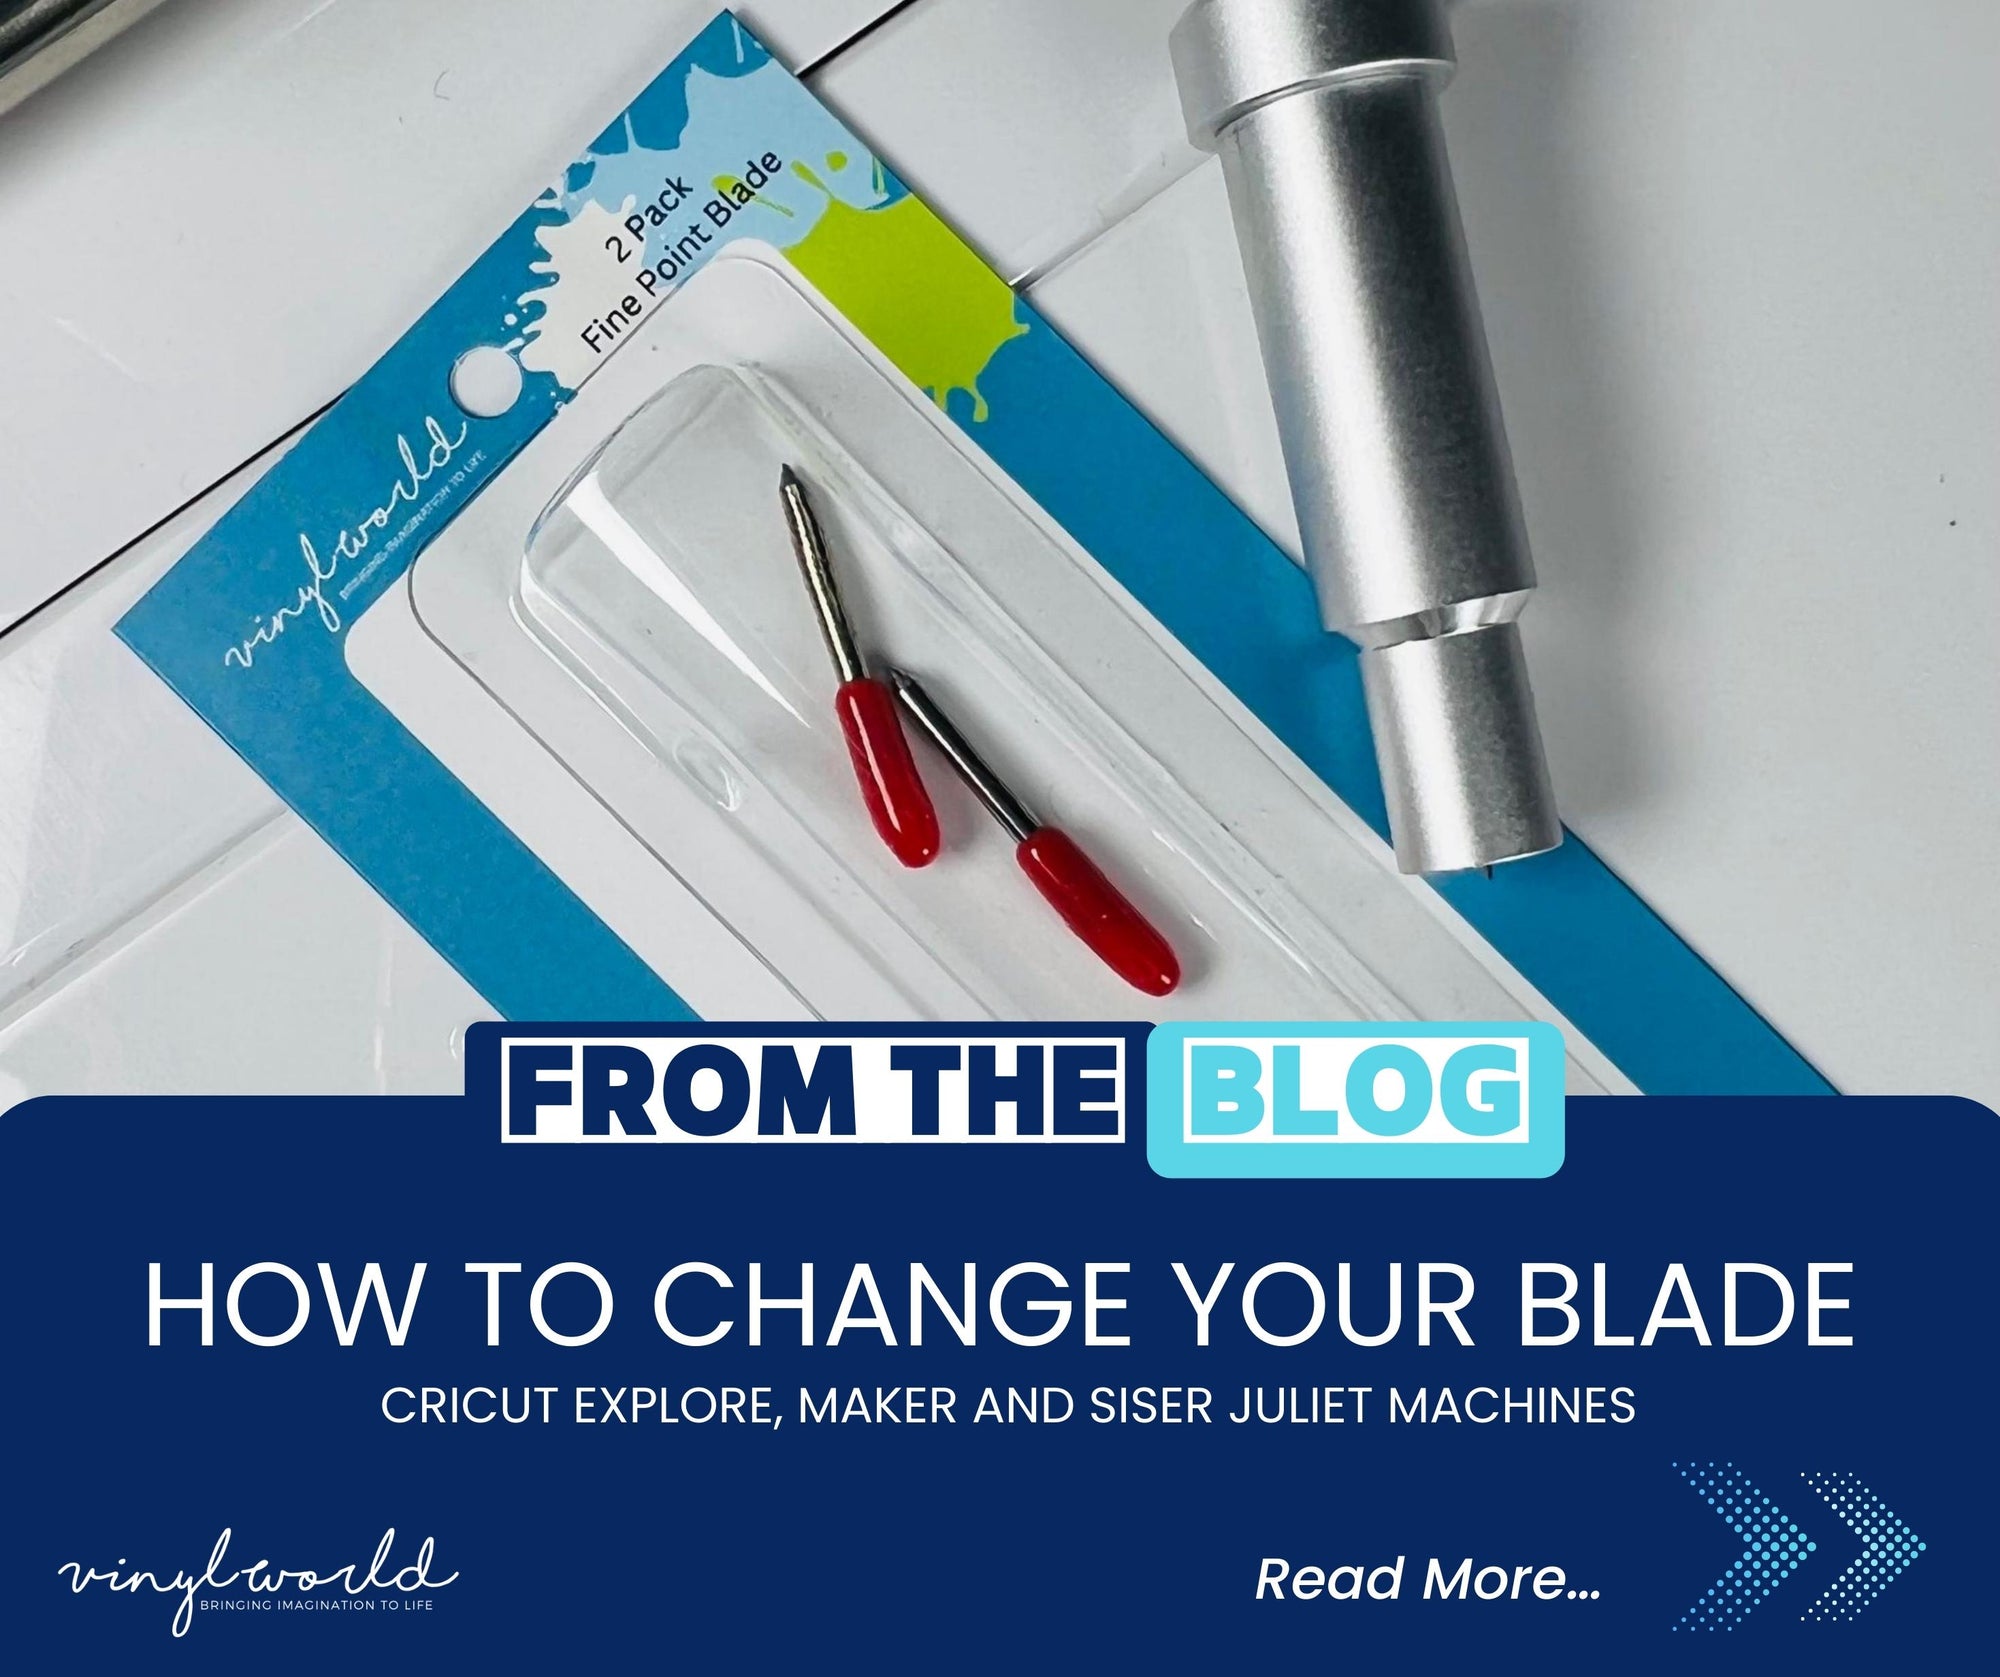 How to change your blade - Cricut Explore, Maker and Siser Juliet Machines